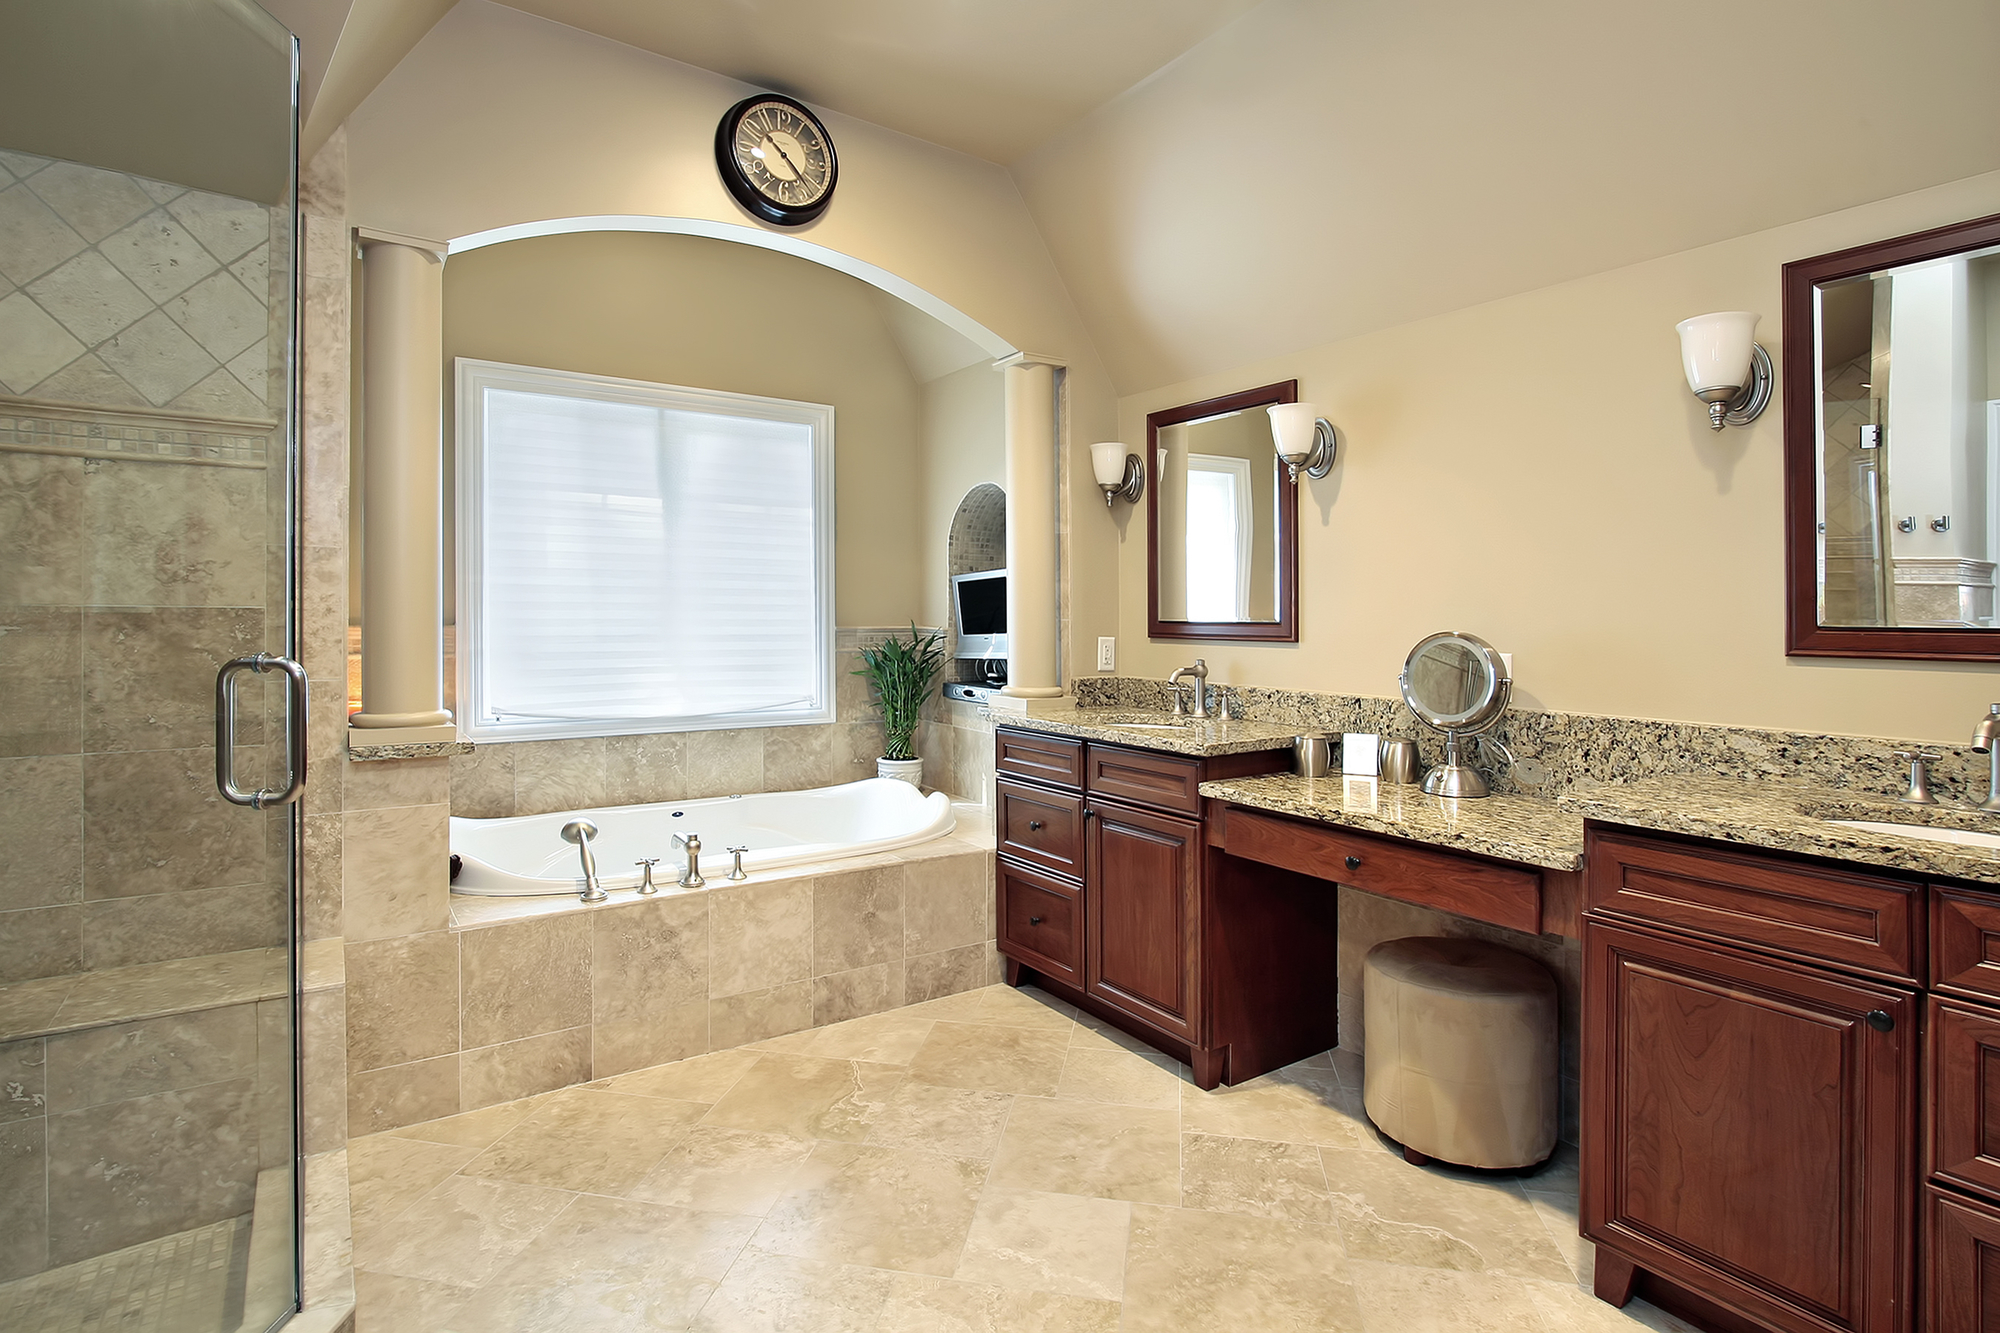 3 Most Durable Materials For Your Bathroom Countertops Selective